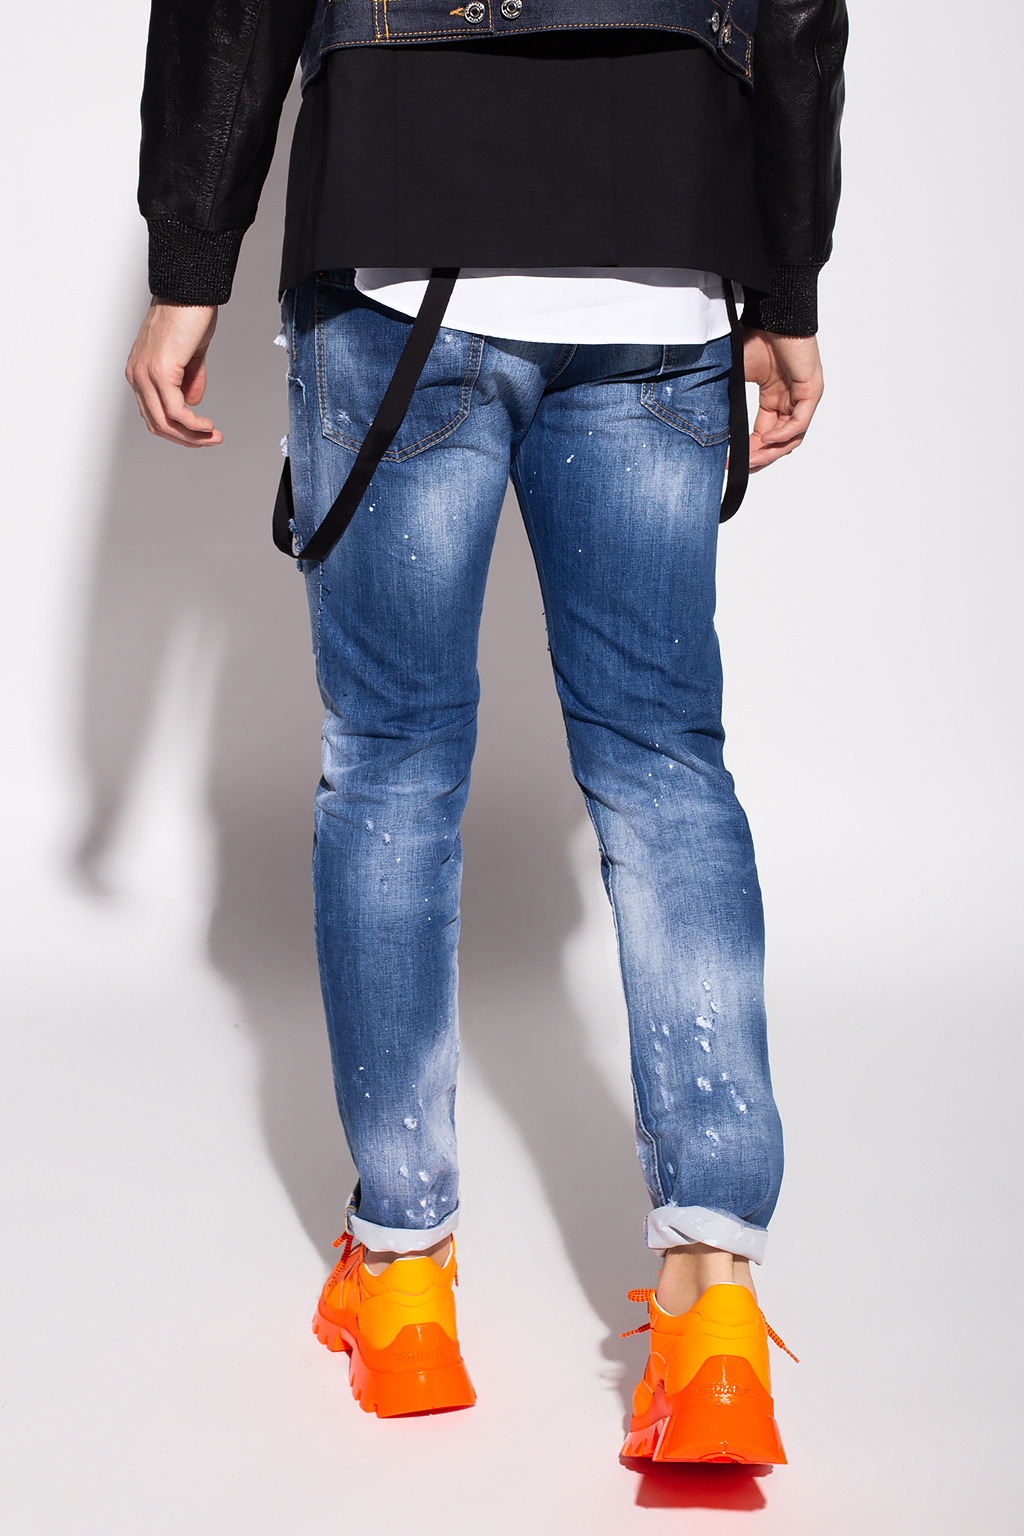 Dsquared2 ‘Cool Guy Jean’ jeans